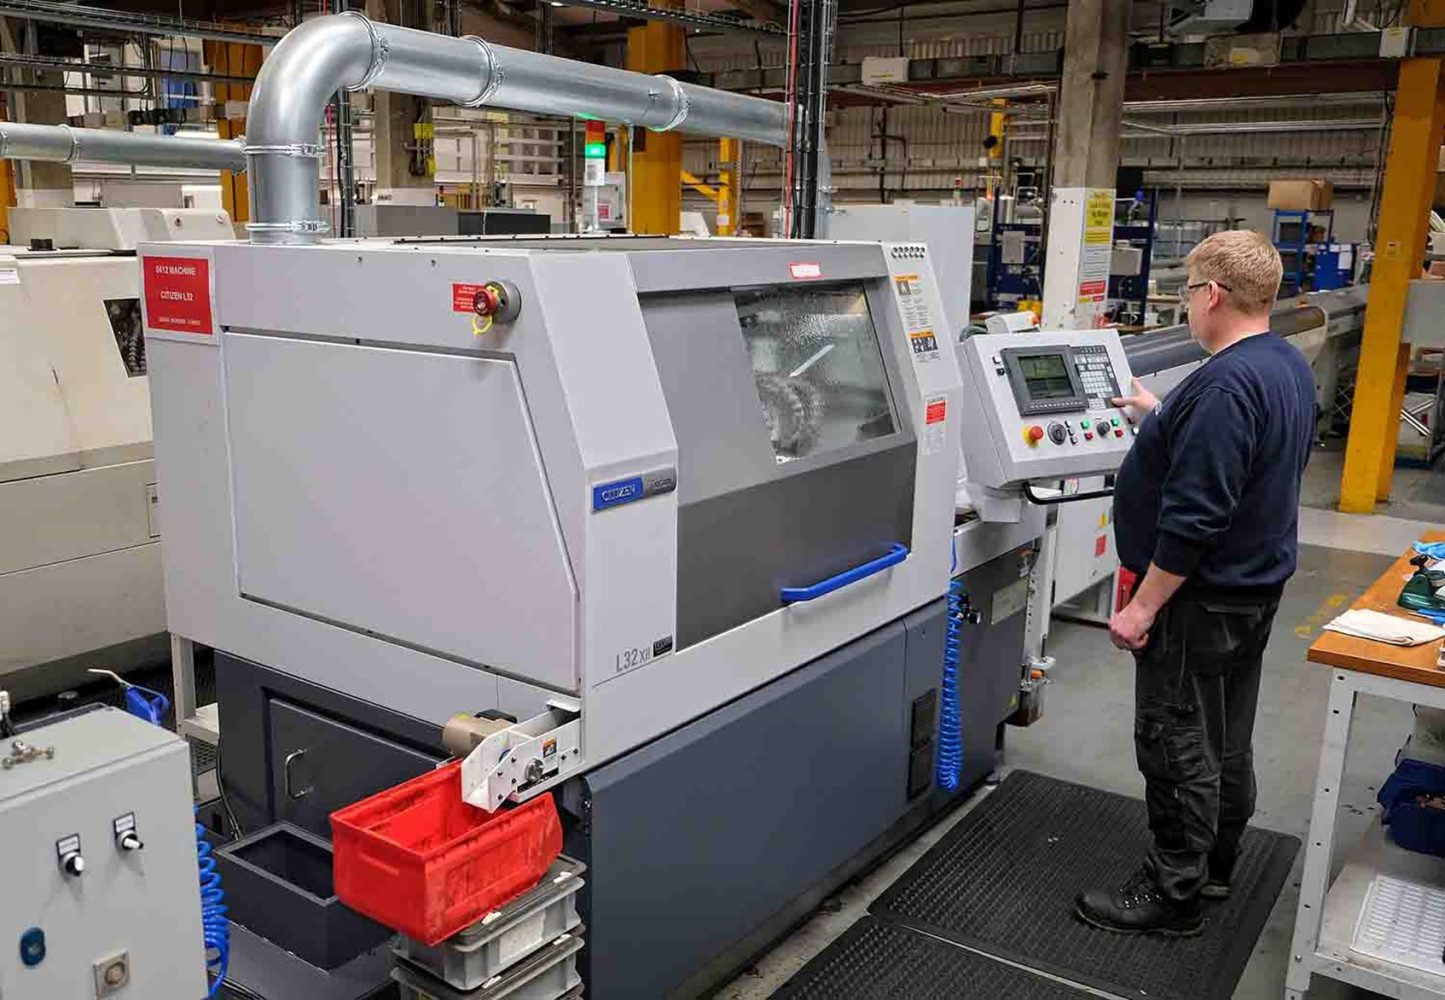 sliding-head lathe<br />
installed at Metaltech Precision<br />
